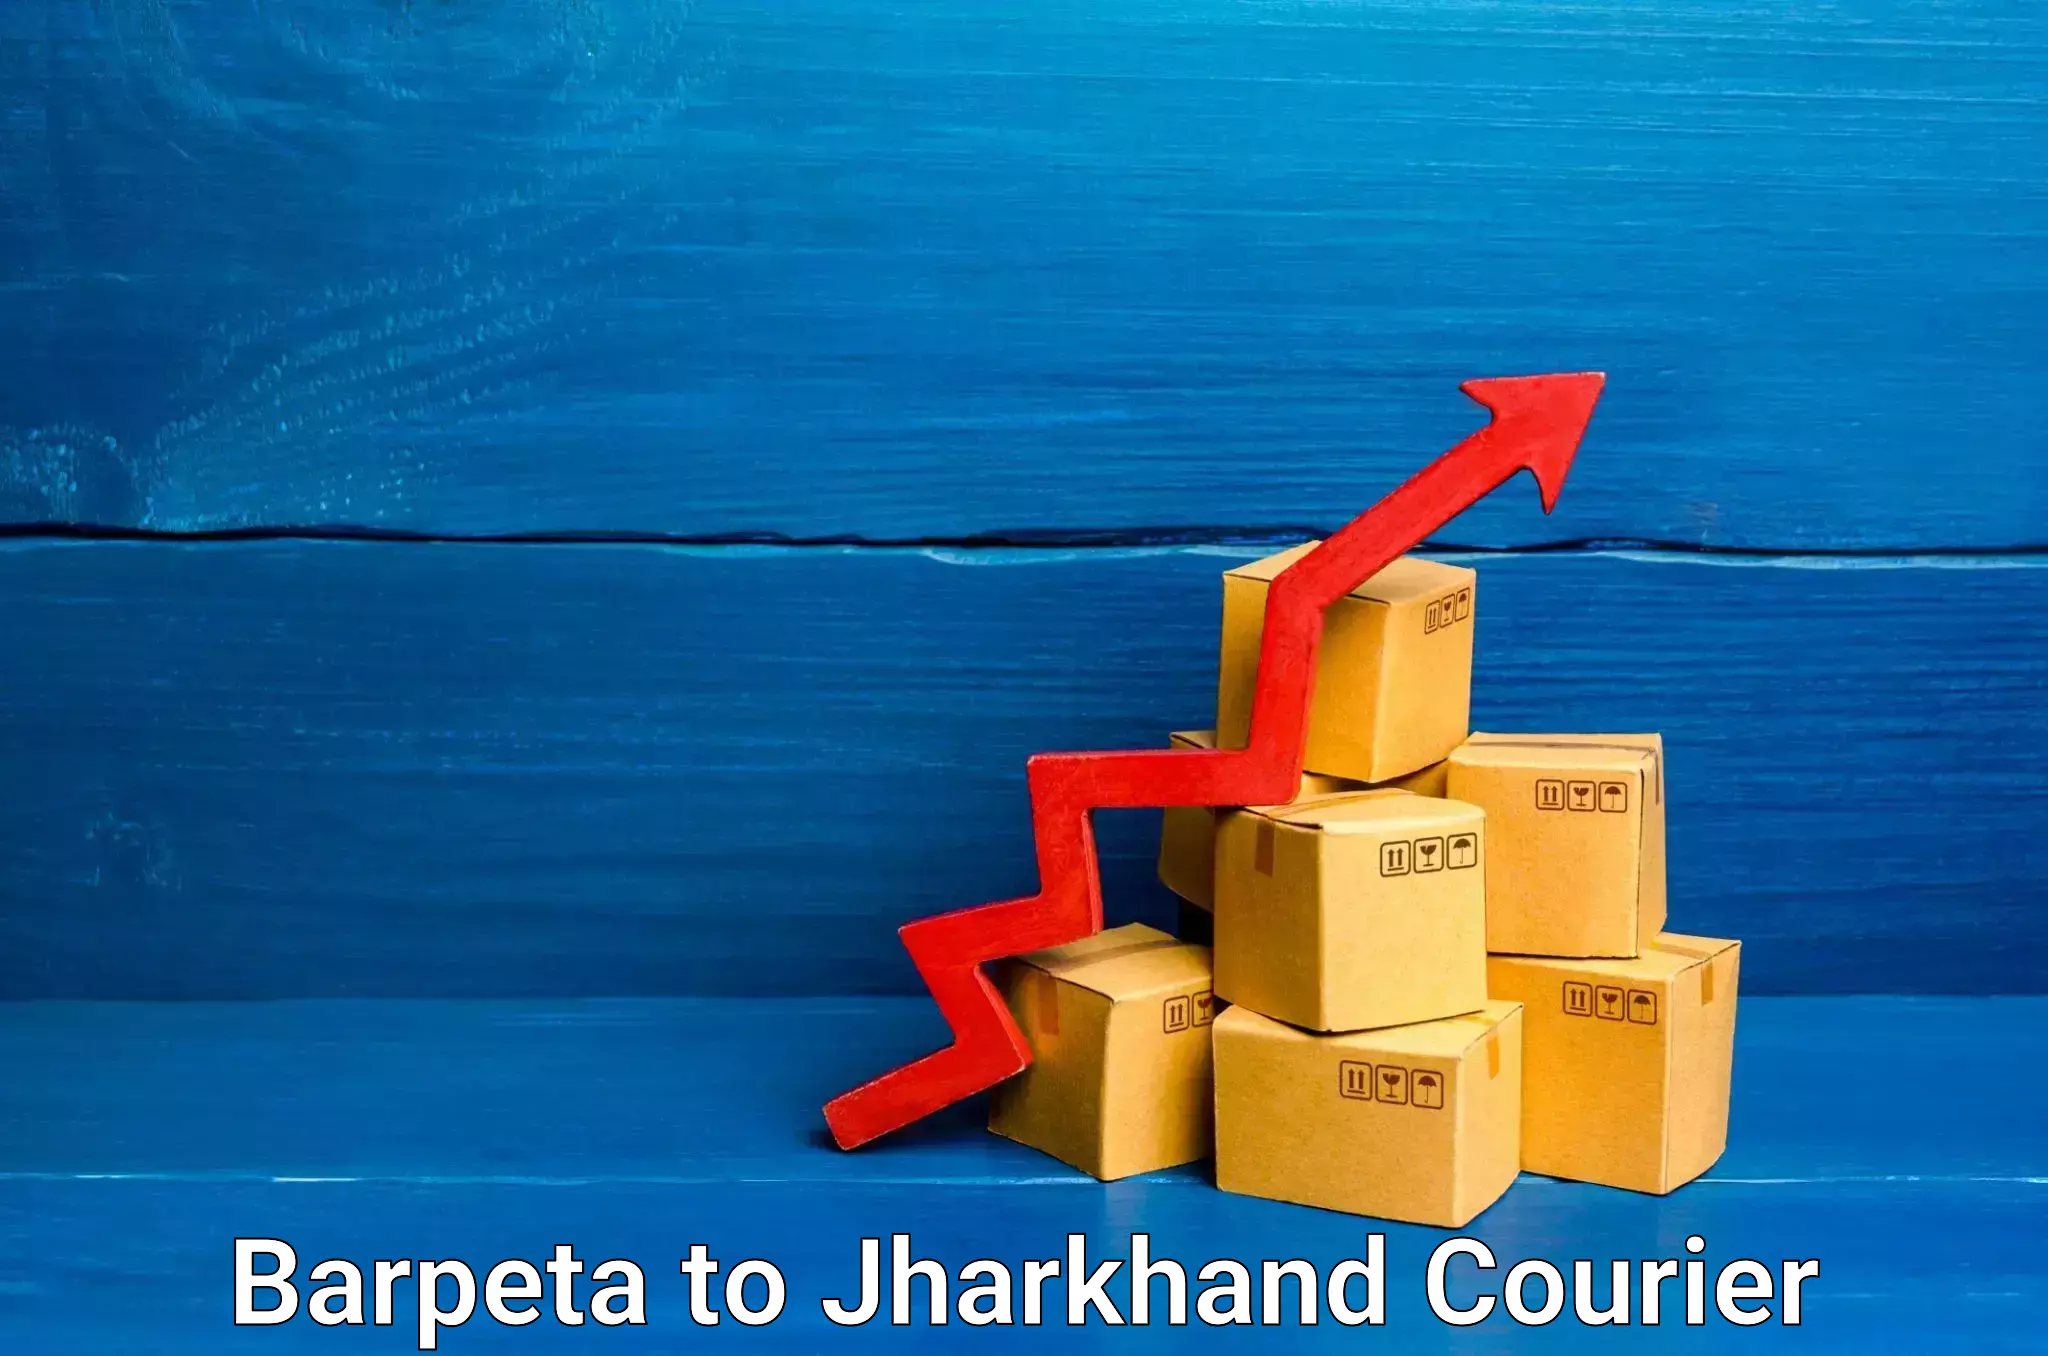 Urgent courier needs in Barpeta to Dhanbad